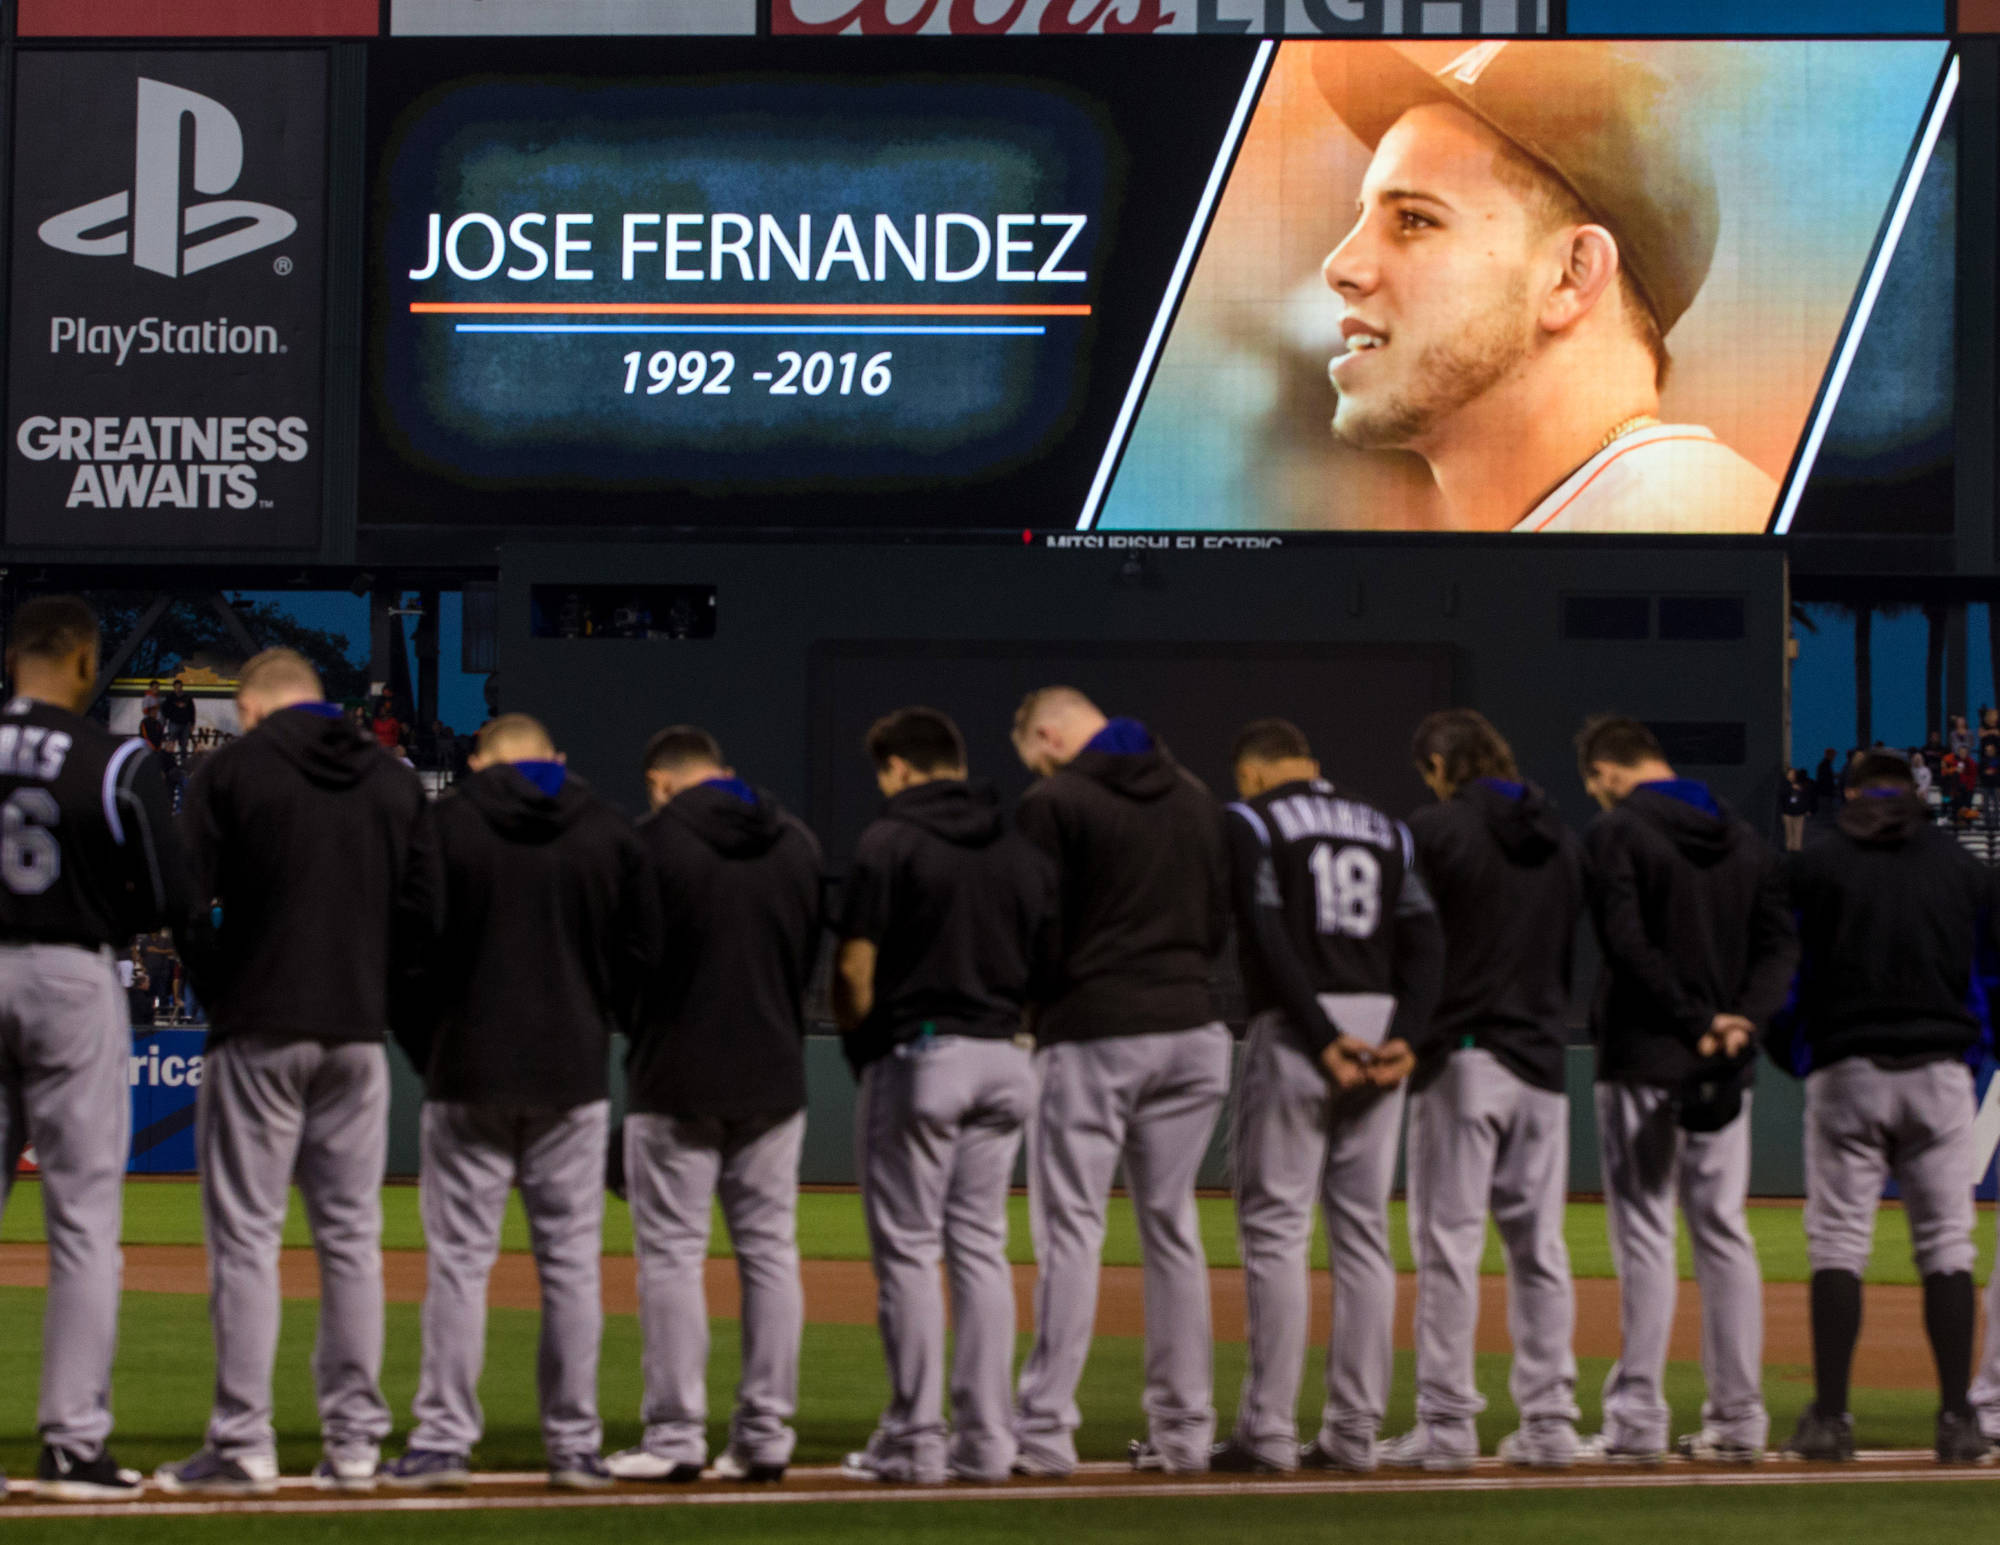 Media Trying To Smear The Legacy Of Jose Fernandez